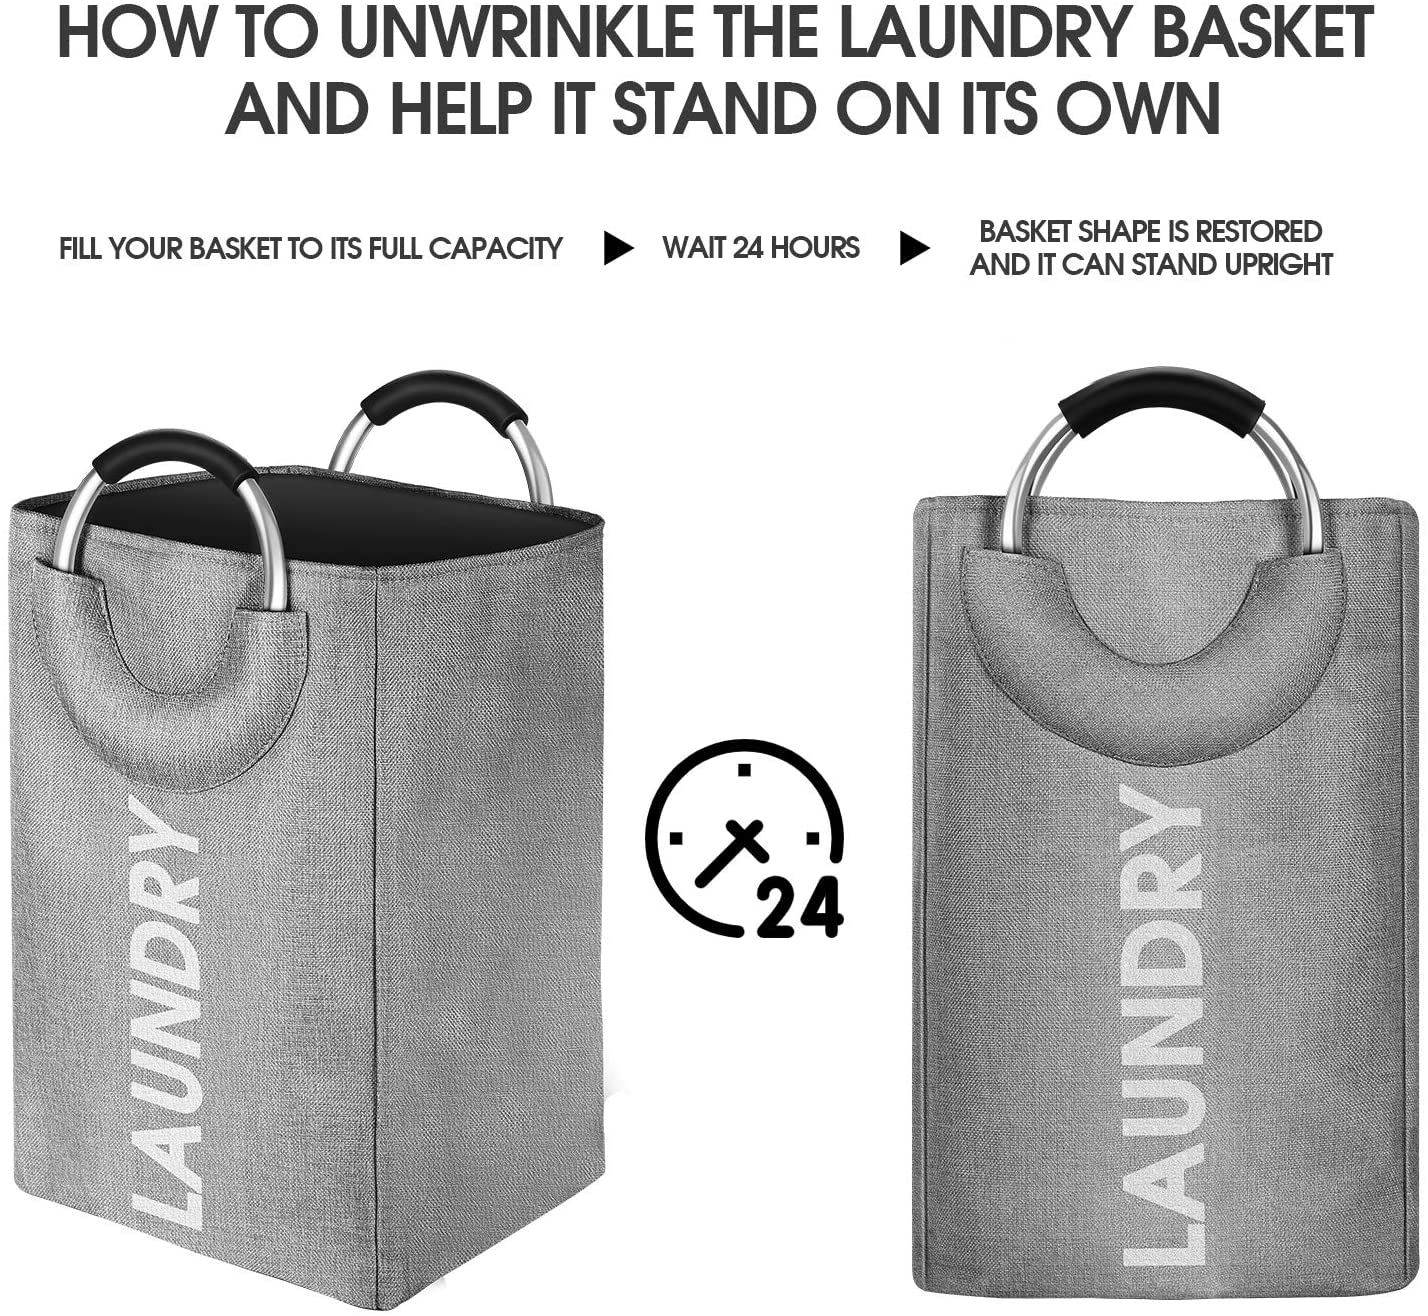 Foldable Laundry Bag: Store Linens, Clothes, Toys & More!